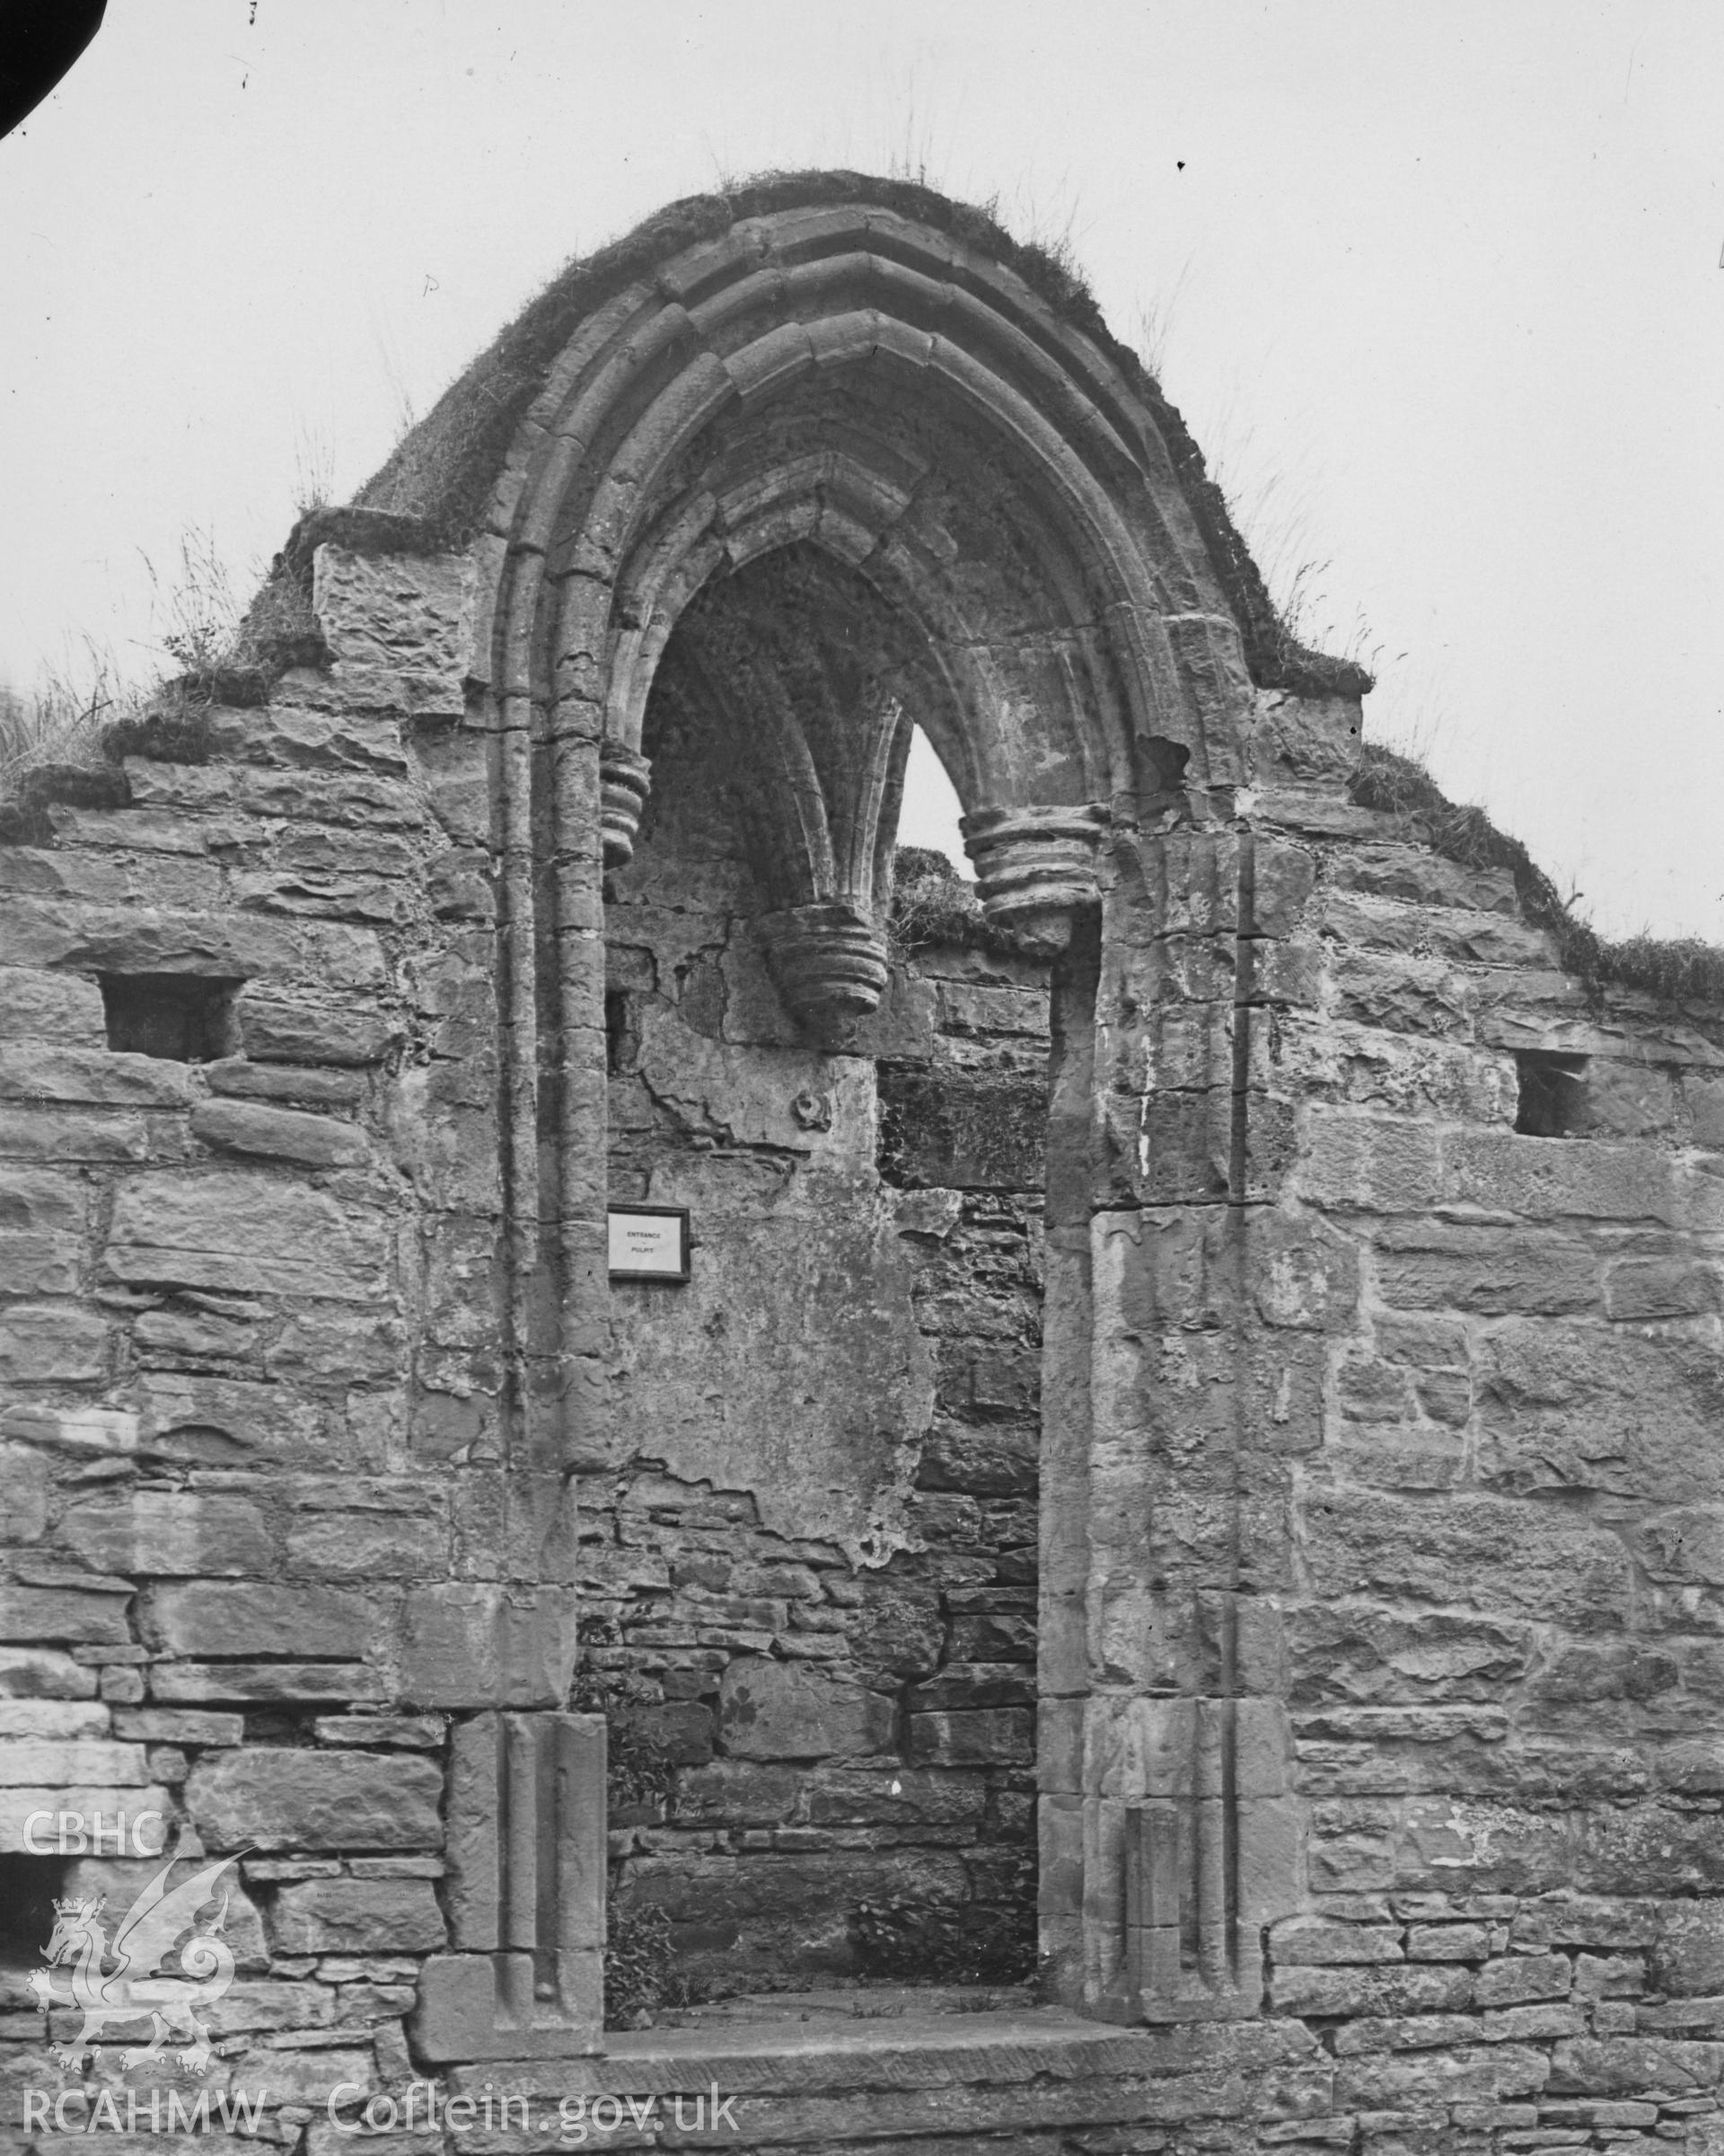 Digital copy of a view of arched recess in wall at Tintern Abbey.